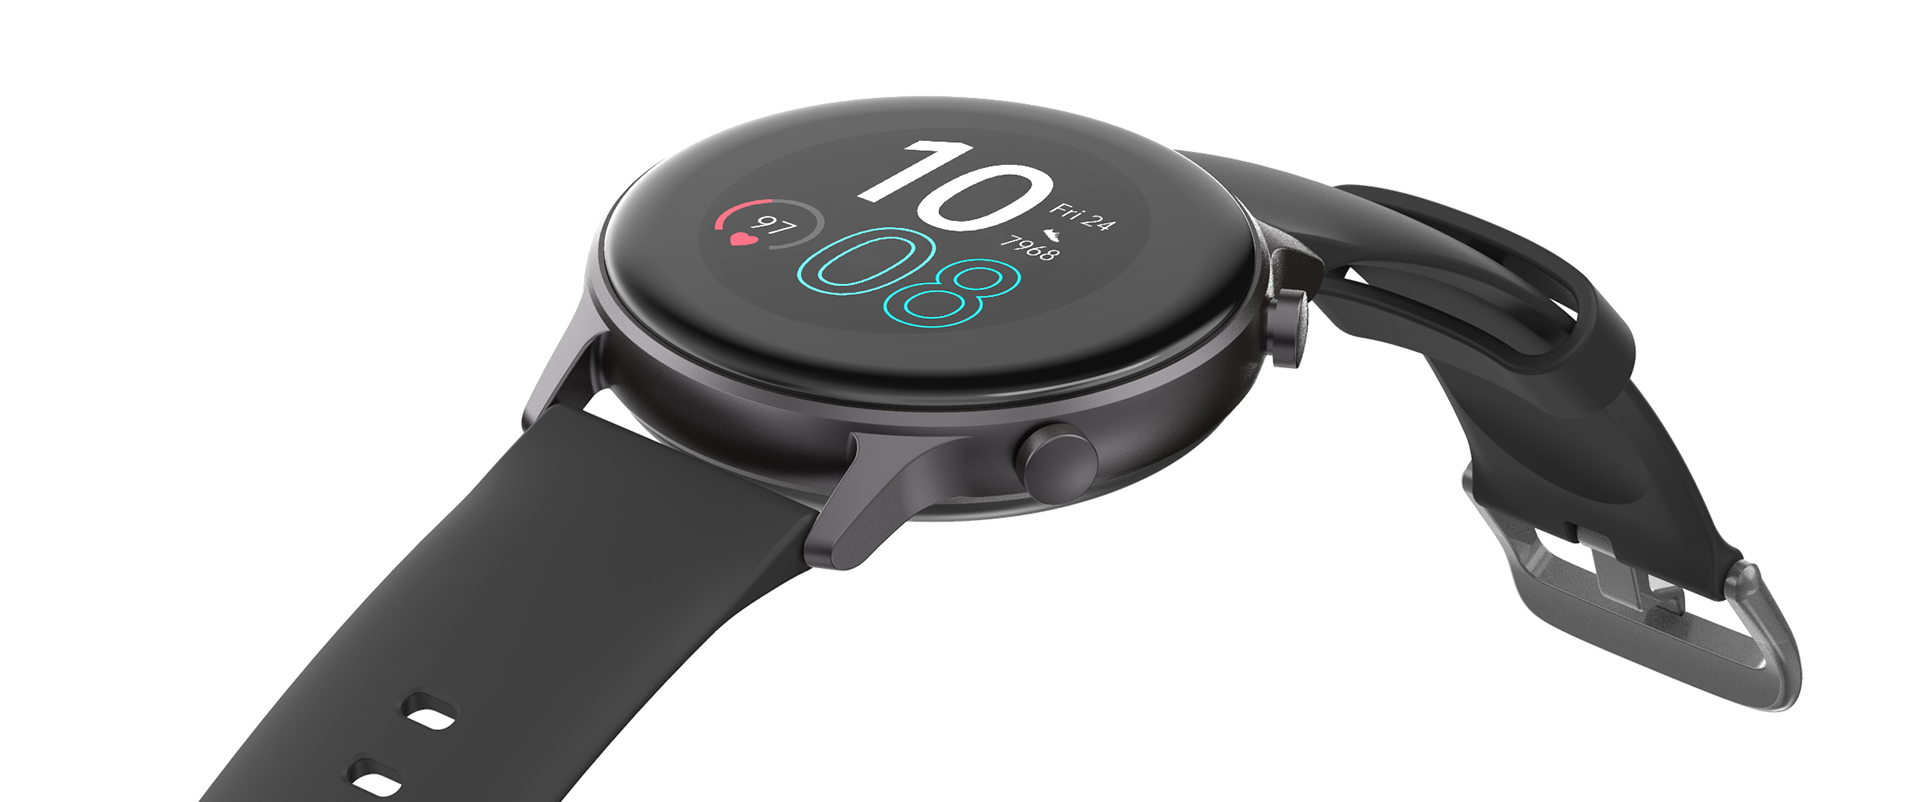 UMIDIGI Urun- GPS Sports Smartwatch Launched for Just $40